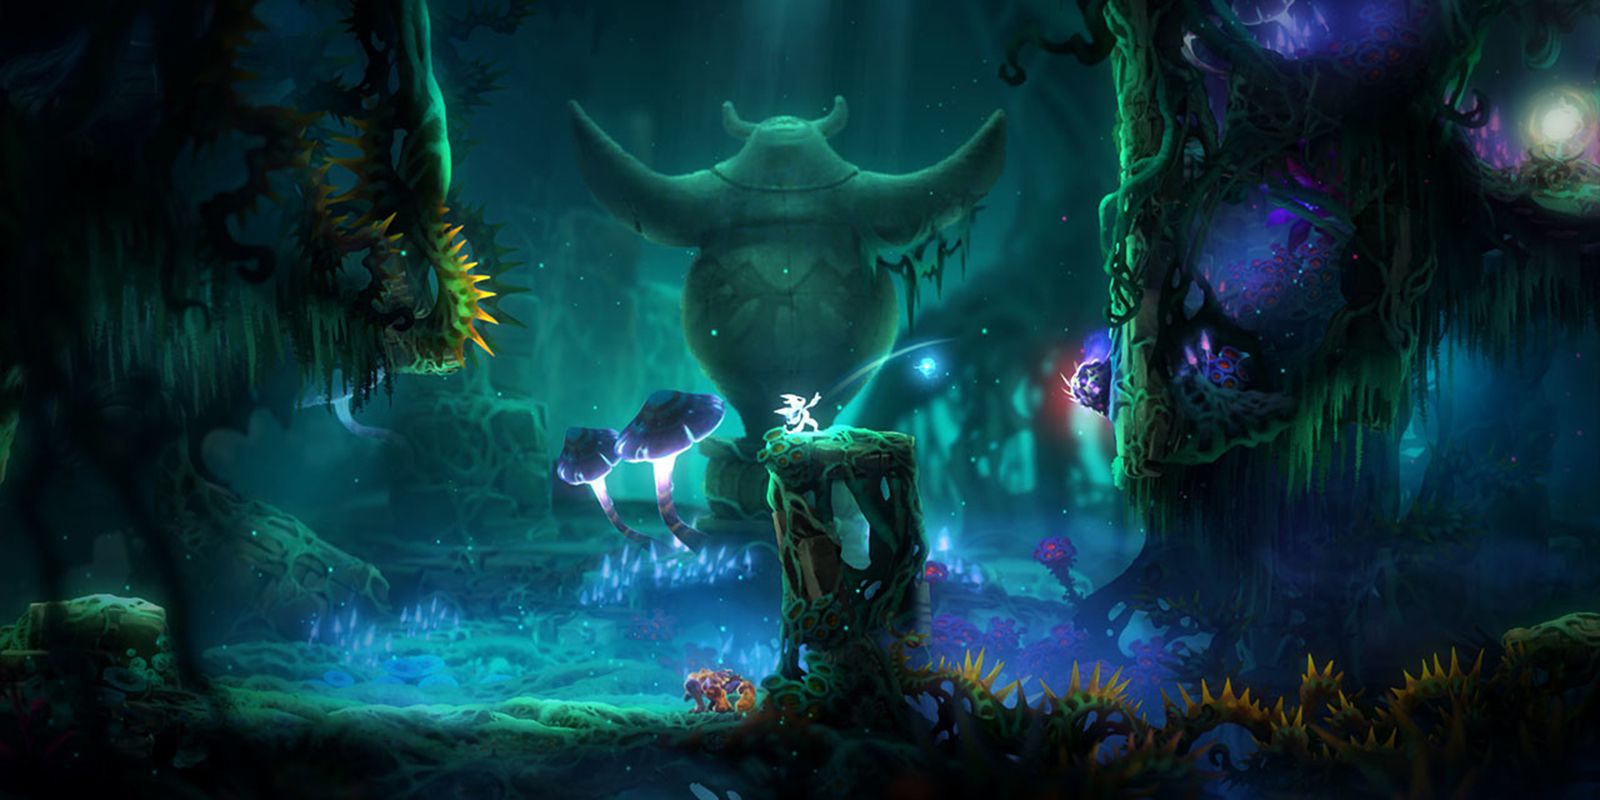 Ori And The Blind Forest - Ori Standing In A Dark Cave Filled With Spikes, Mushrooms, And Grass